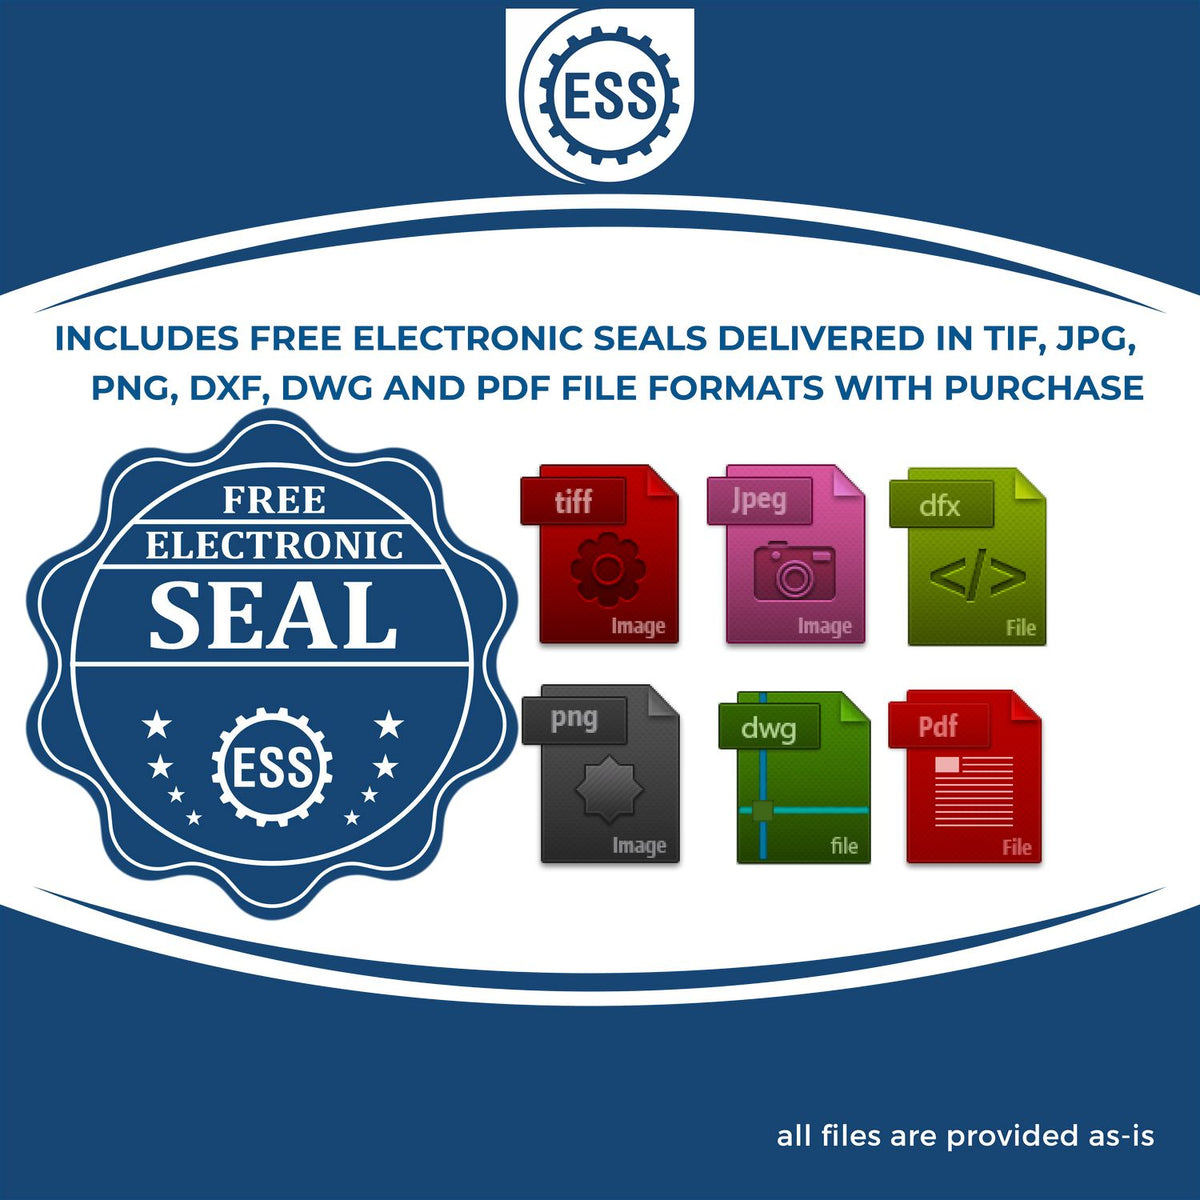 An infographic for the free electronic seal for the Gift Kansas Engineer Seal illustrating the different file type icons such as DXF, DWG, TIF, JPG and PNG.